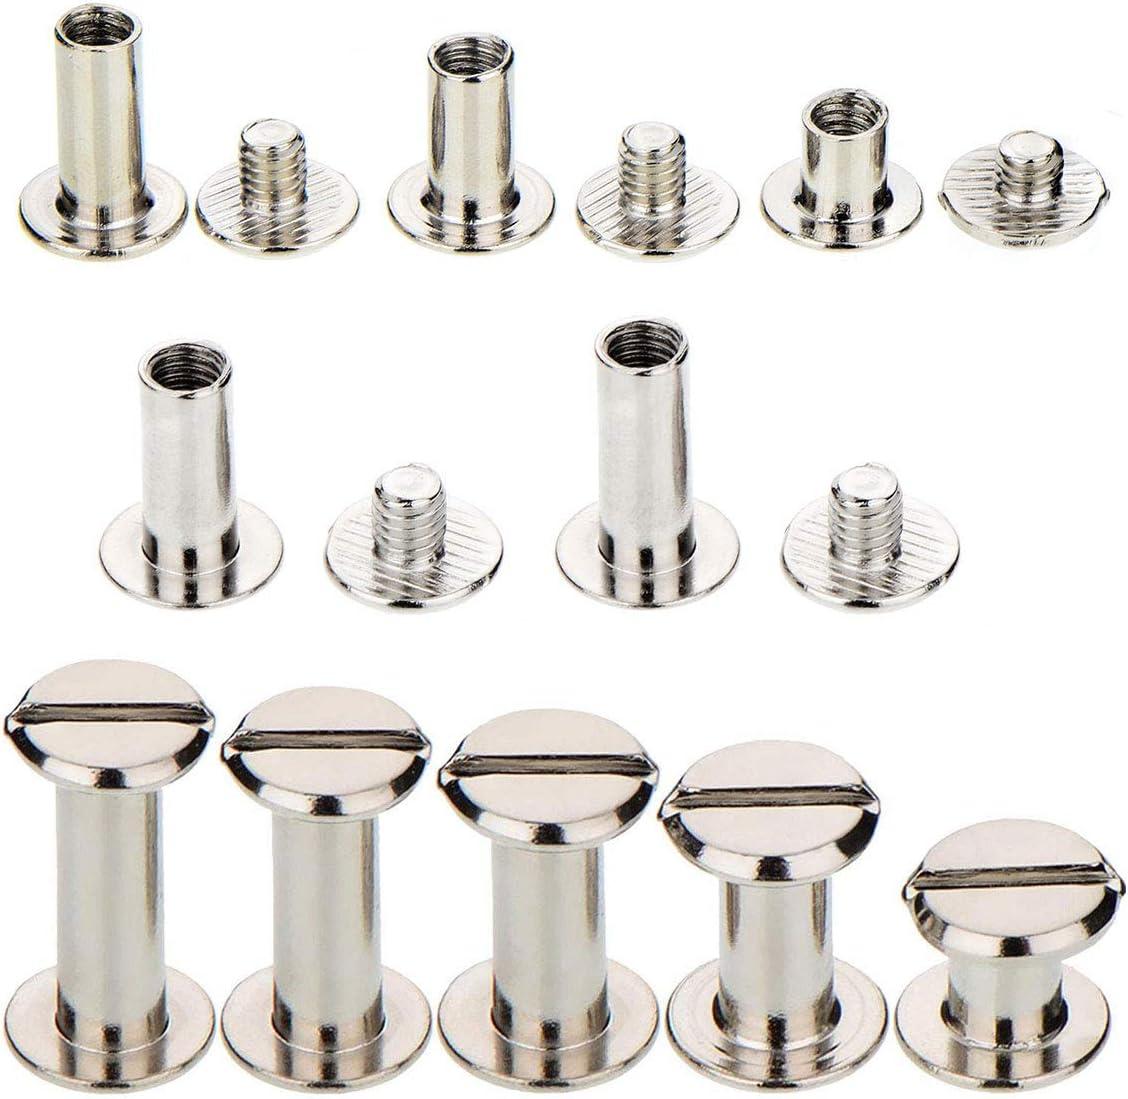 100 Sets Screw Post Metal Chicago Screws Binding Screw Leather Screw Nail  Rivet Button Solid Belt Tack Screw (Silvery 1/4 3/8 1/2 9/16 11/16 Inches)